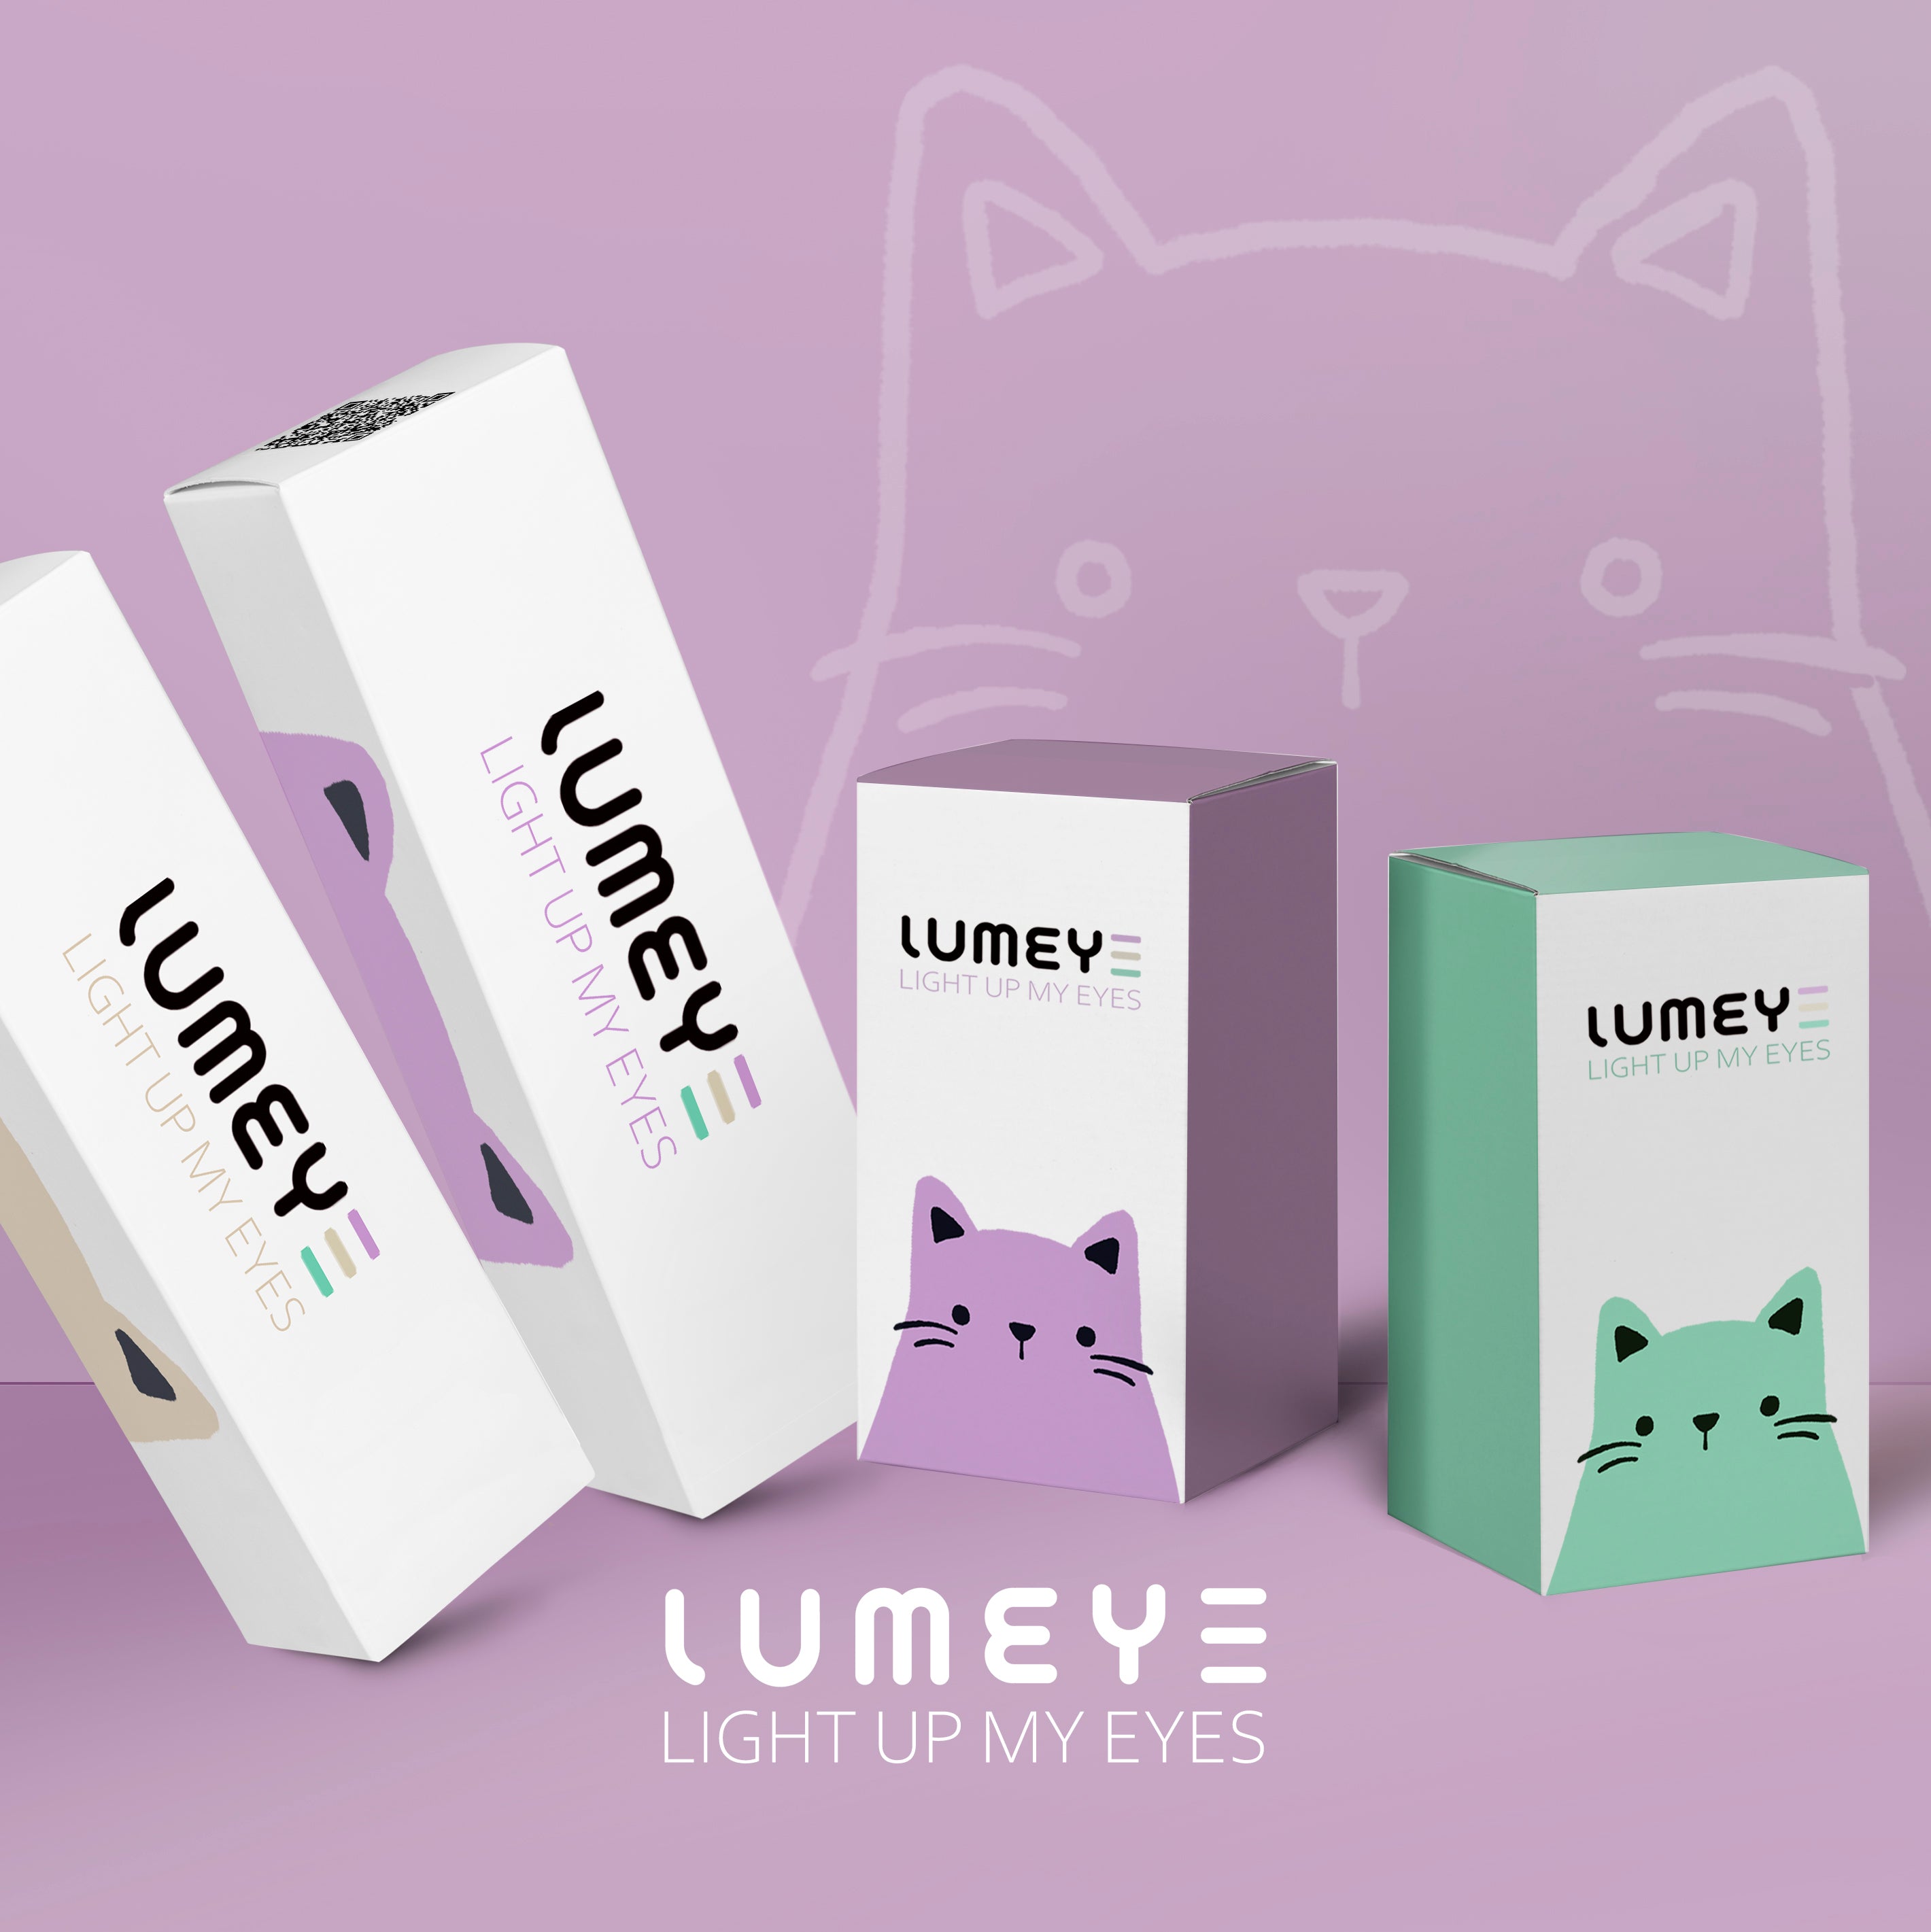 Best COLORED CONTACTS - LUMEYE Real Khaki Colored Contact Lenses - LUMEYE